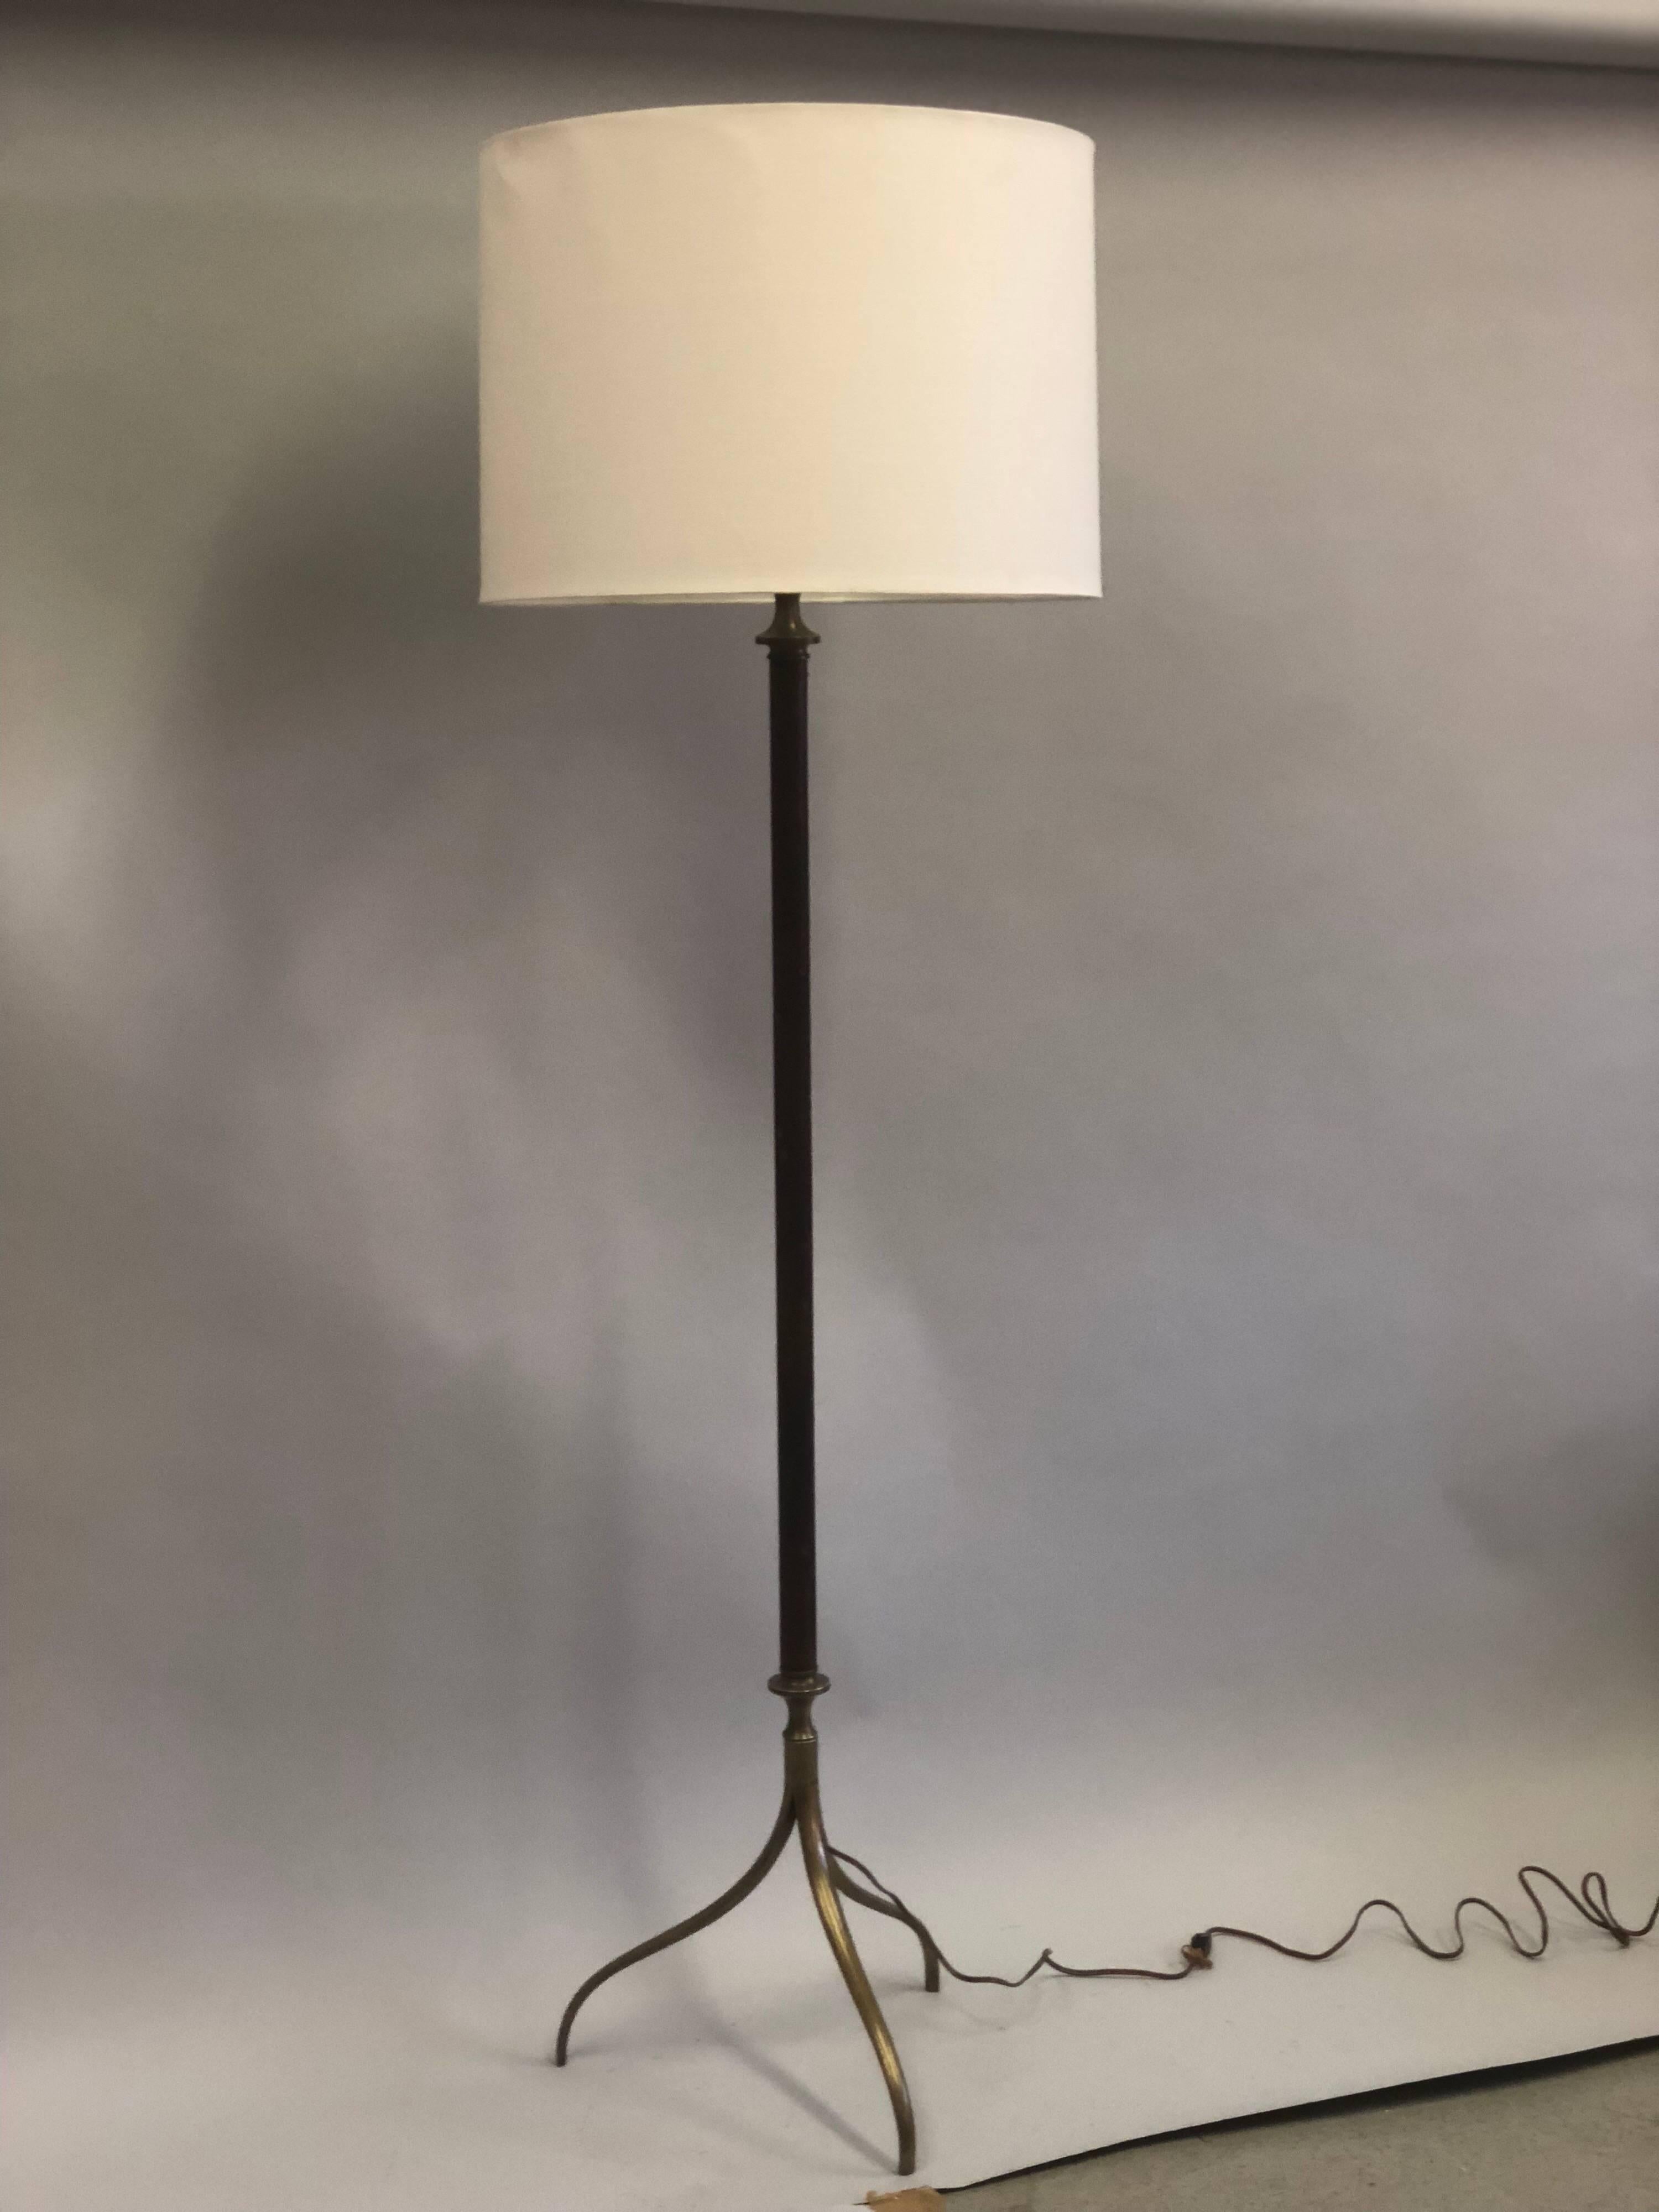 Elegant French Mid-Century Modern, hand-stitched, dark brown leather floor lamp attributed to Jacques Adnet. 

The standing lamp is set on a delicate, gently curving, tapered solid brass tripod base. The dark brown leather is wrapped around the